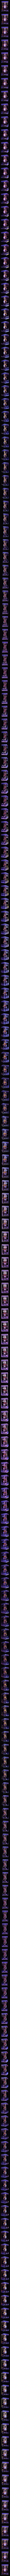 CRYFTY TOYS collection image